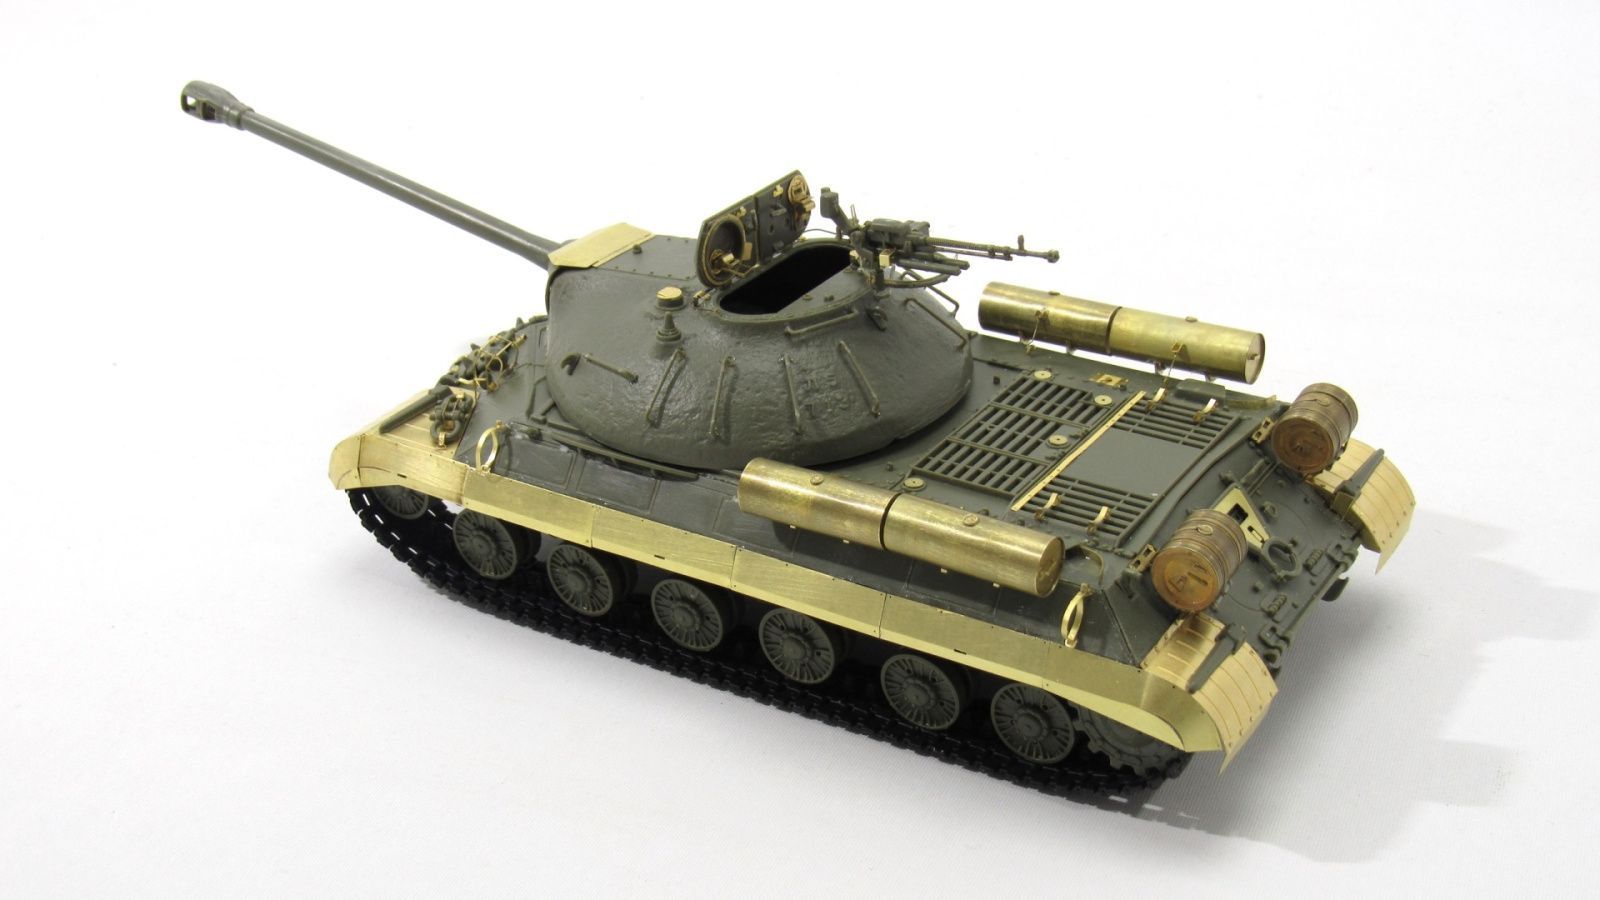 IS-3M (Trumpeter) - imodeller.store